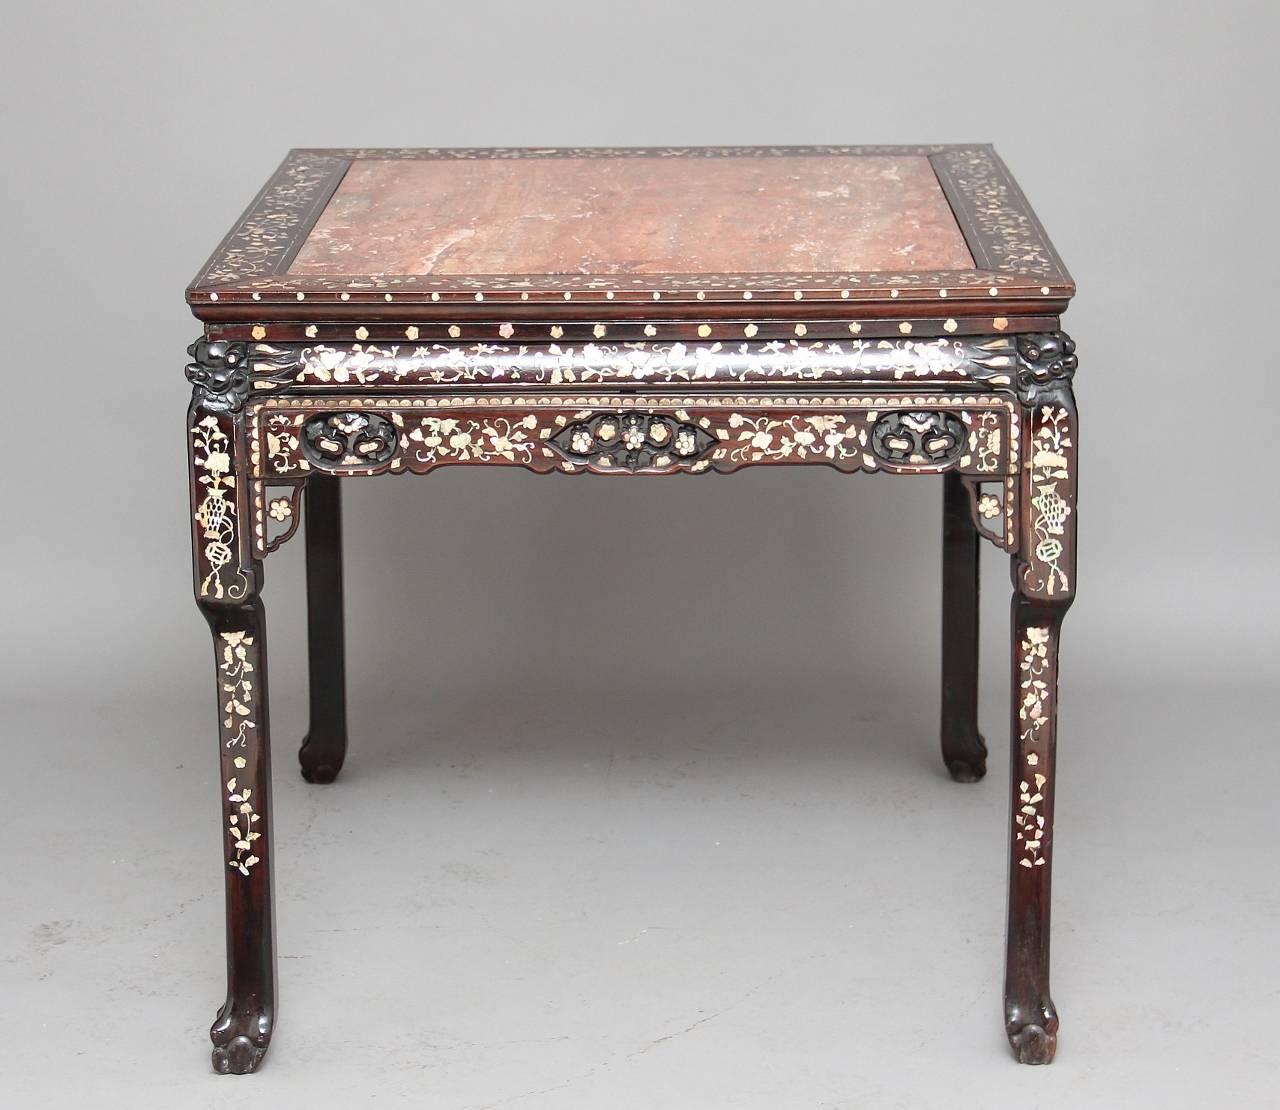 19th century Chinese carved rosewood centre table profusely inlaid with mother-of-pearl, with a pink marble top, with pierced fret along the sides, standing on ball and claw feet, circa 1880.
Minor losses and restorations.

Measuress: Height: